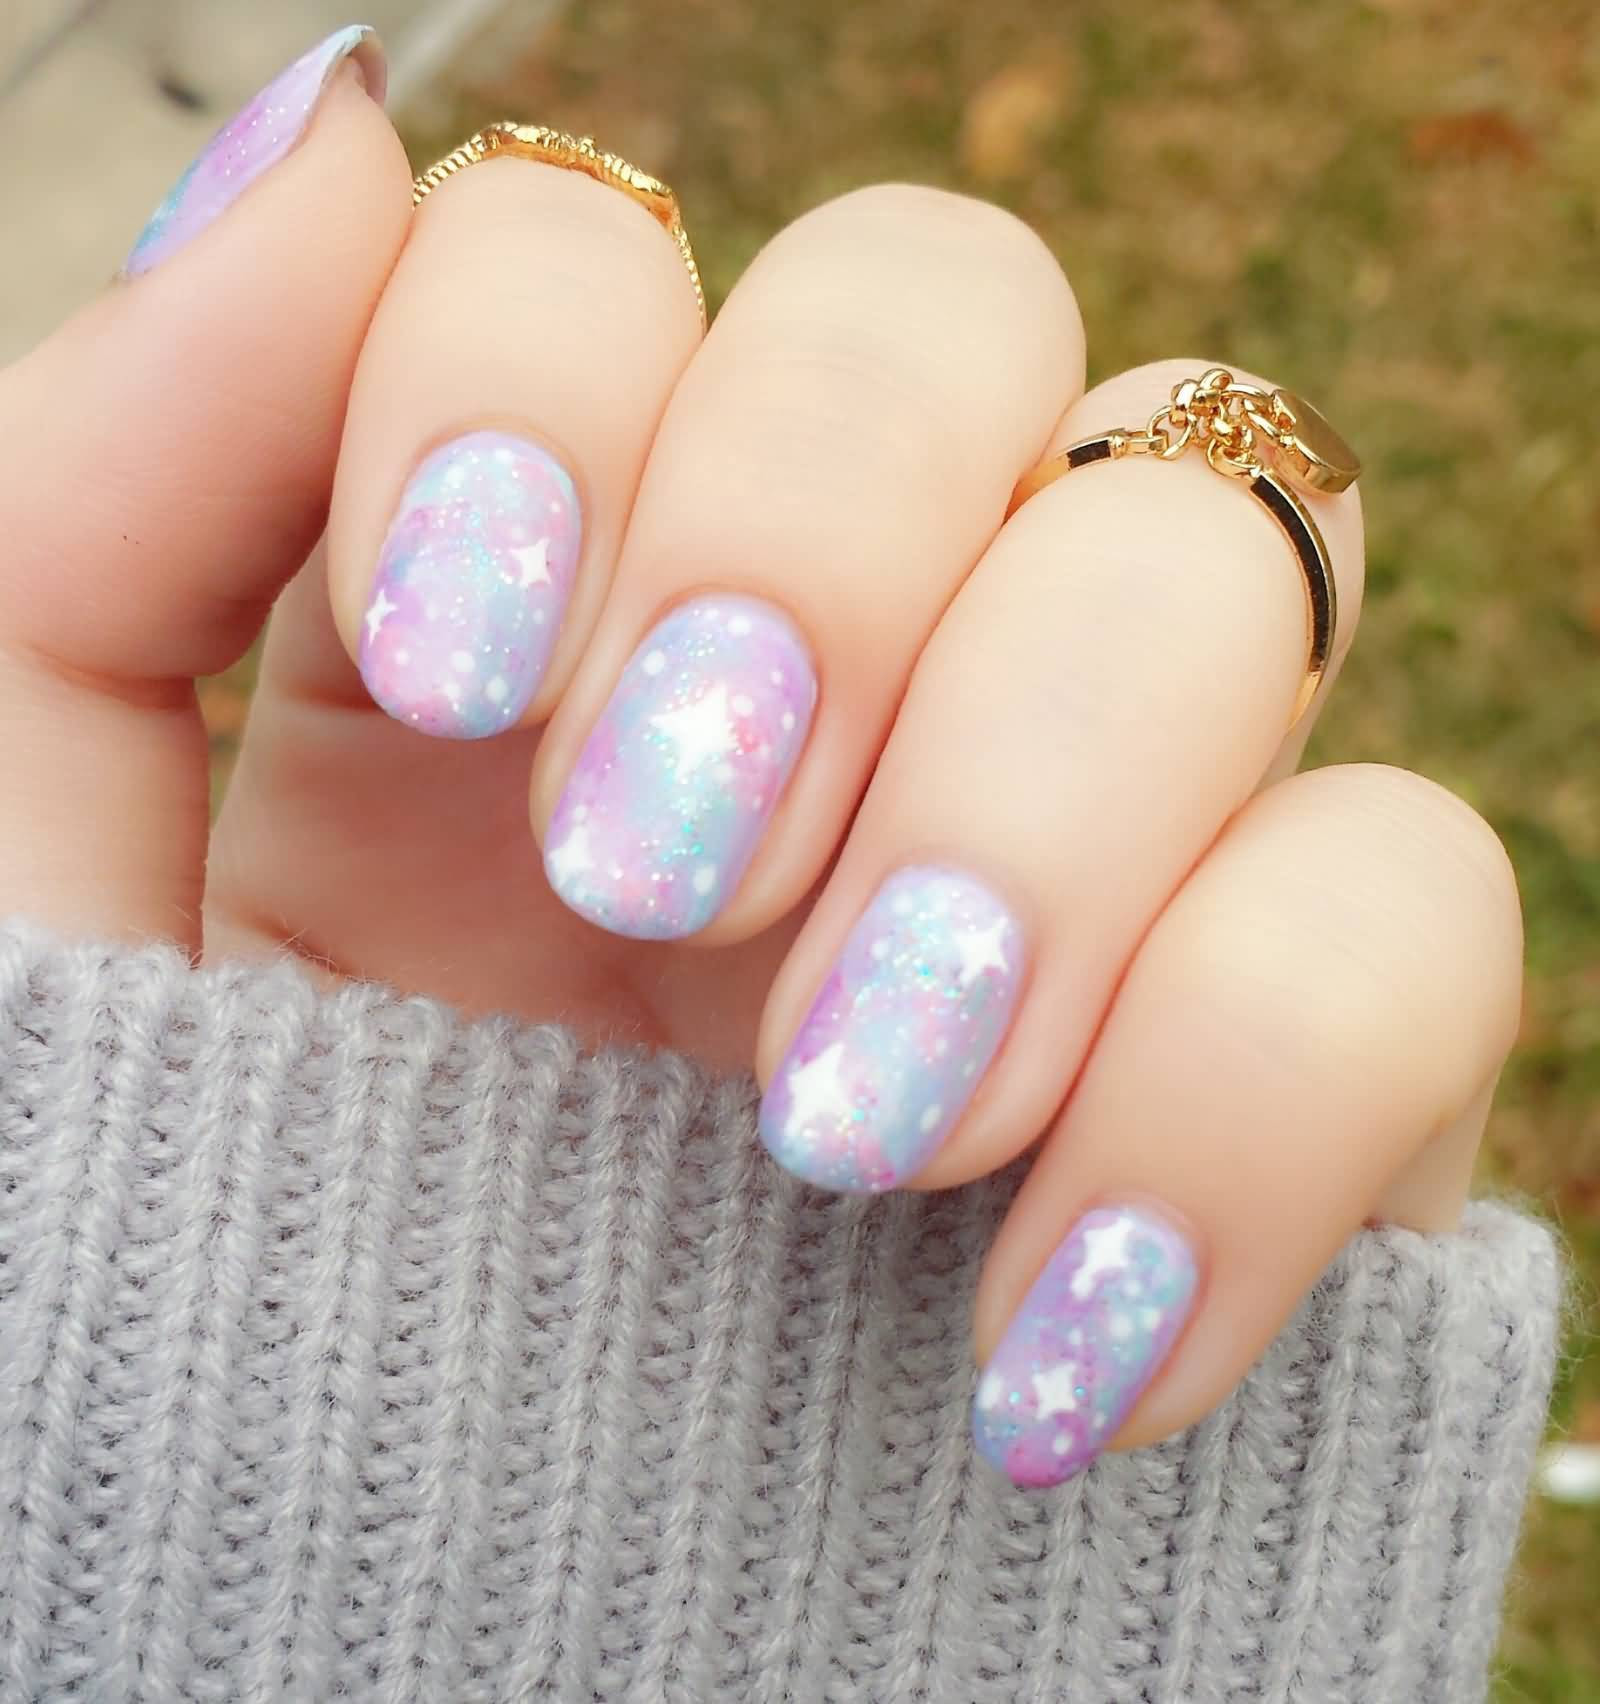 Pastel Colors Nail Designs
 50 Most Beautiful Pastel Nail Art Design Ideas For Trendy